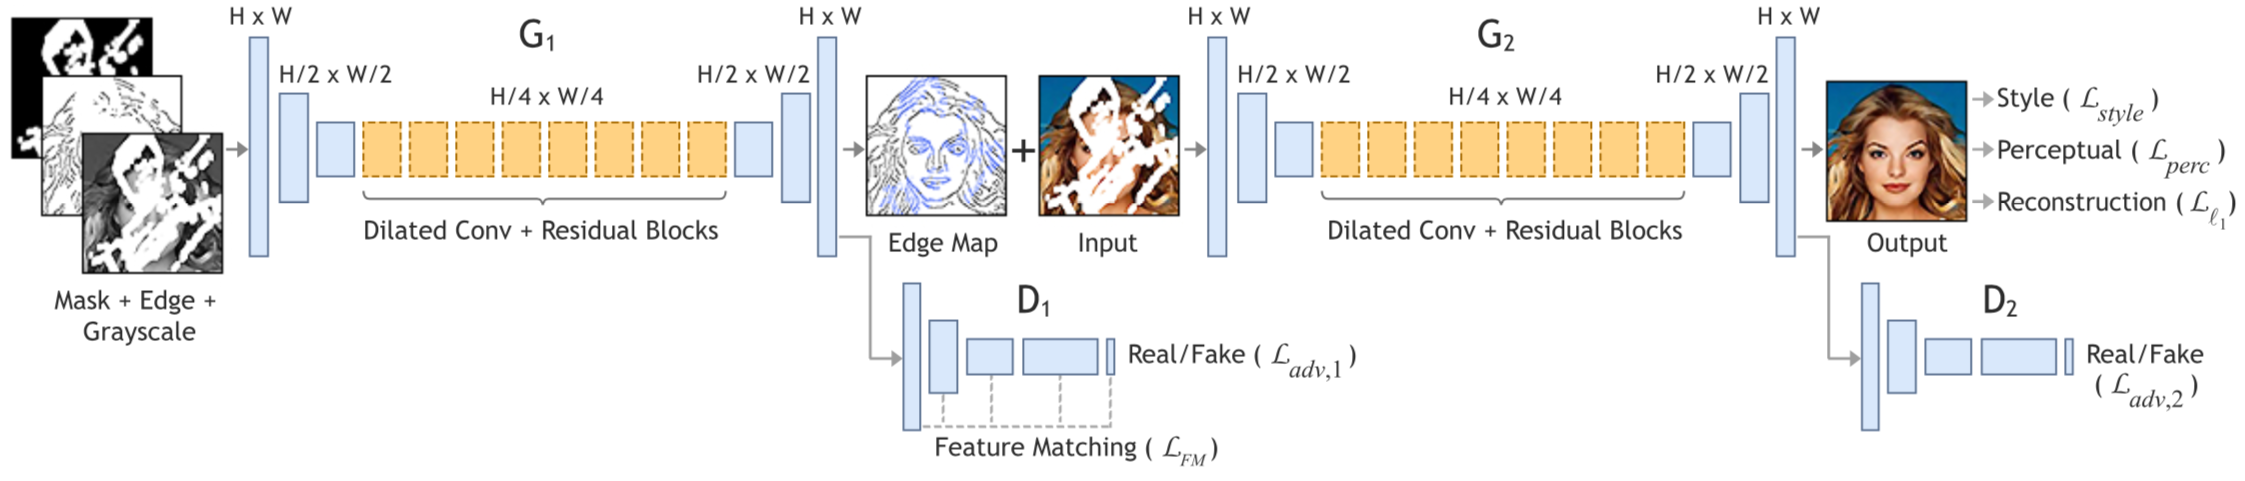 Proposed Generative Adversarial Network for structure guided image completion using edge maps.  Incomplete grayscale image and edge map, and mask are the inputs of G1 to predict the full edge map. Predicted edge map and incomplete color image are passed to G2 to perform the inpainting task.